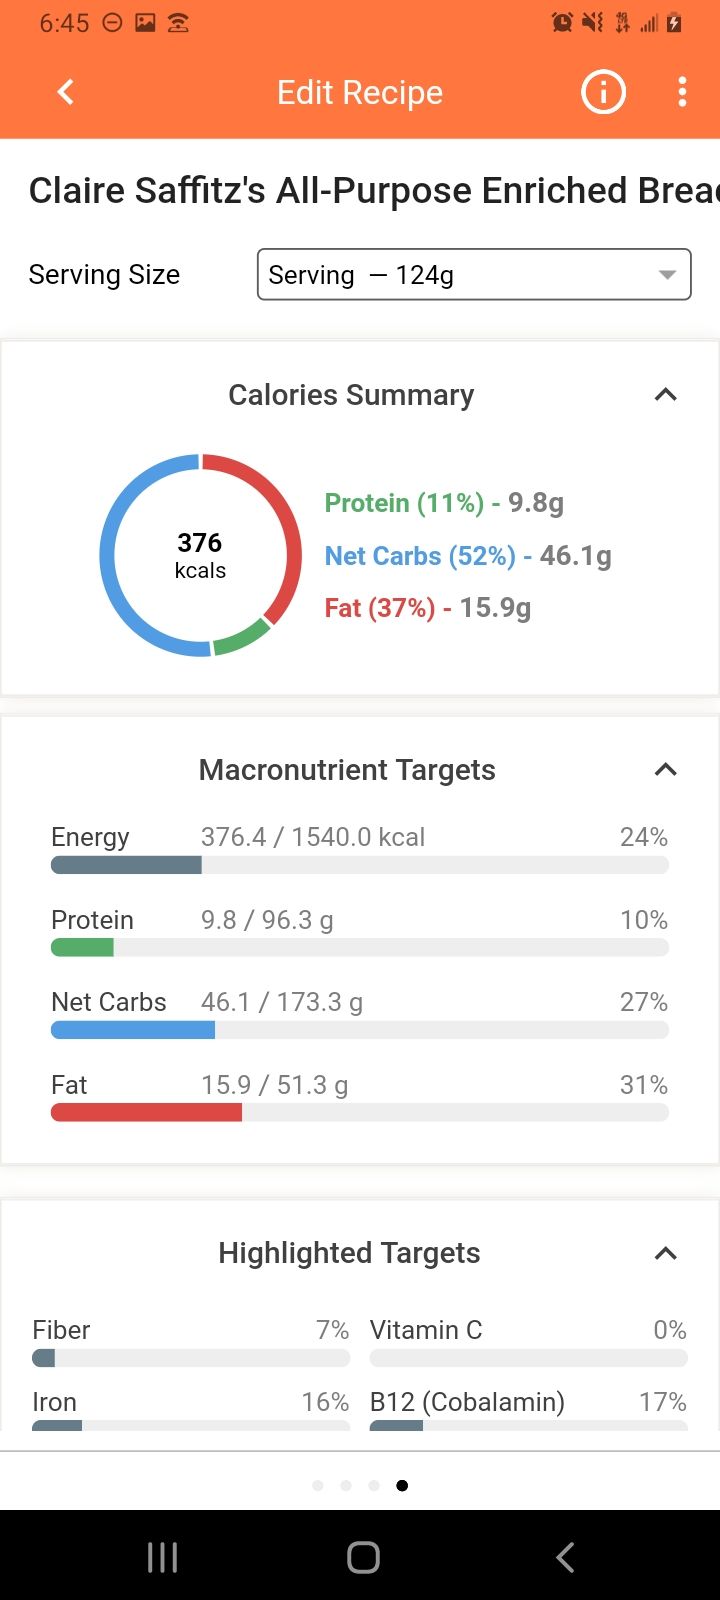 The nutrition breakdown of our recipe